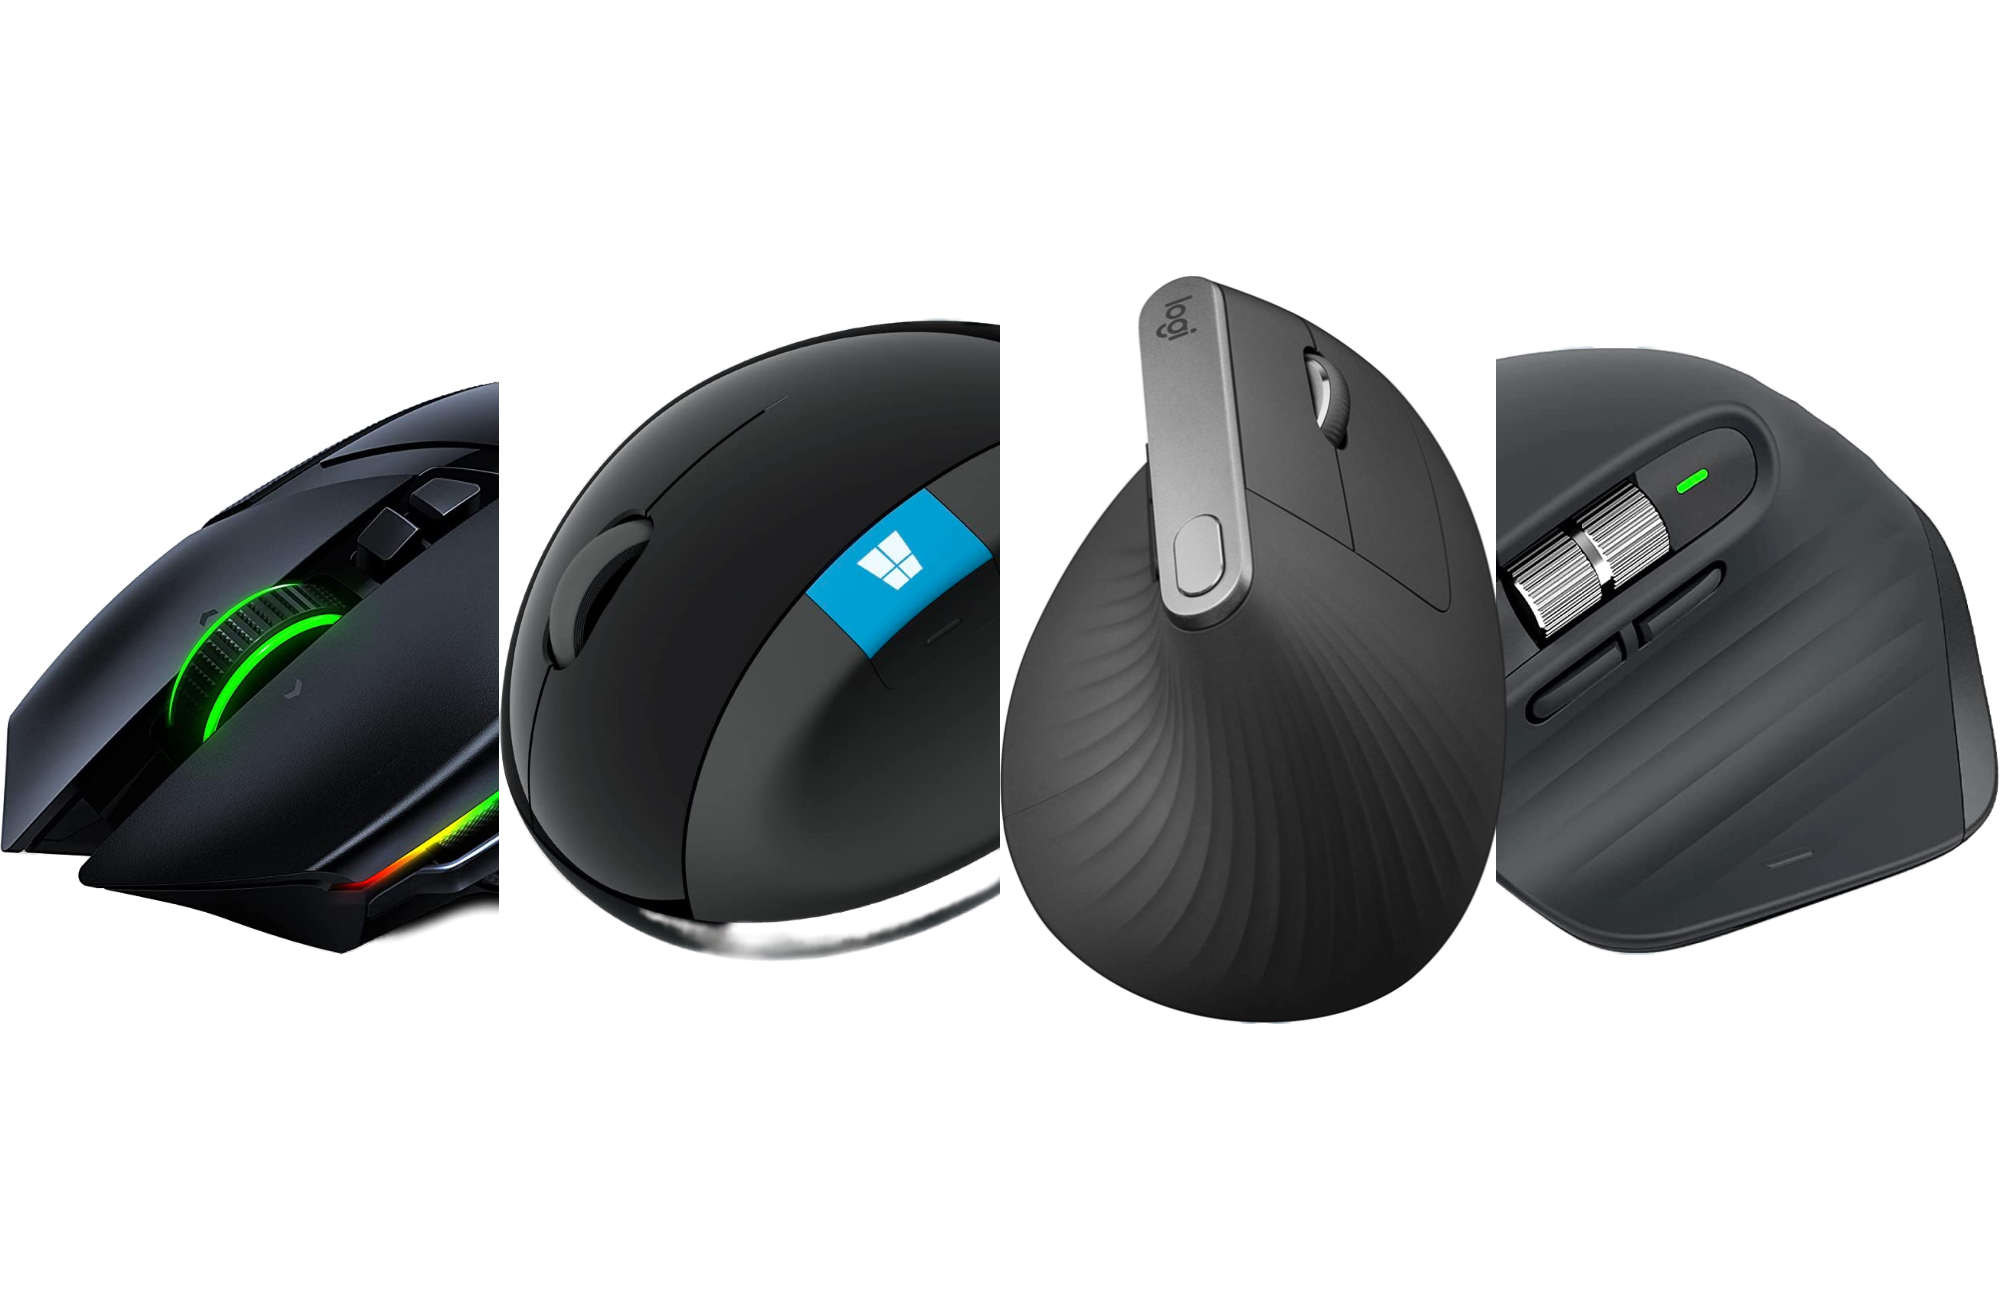 Mouse Accuracy - Product Information, Latest Updates, and Reviews 2023